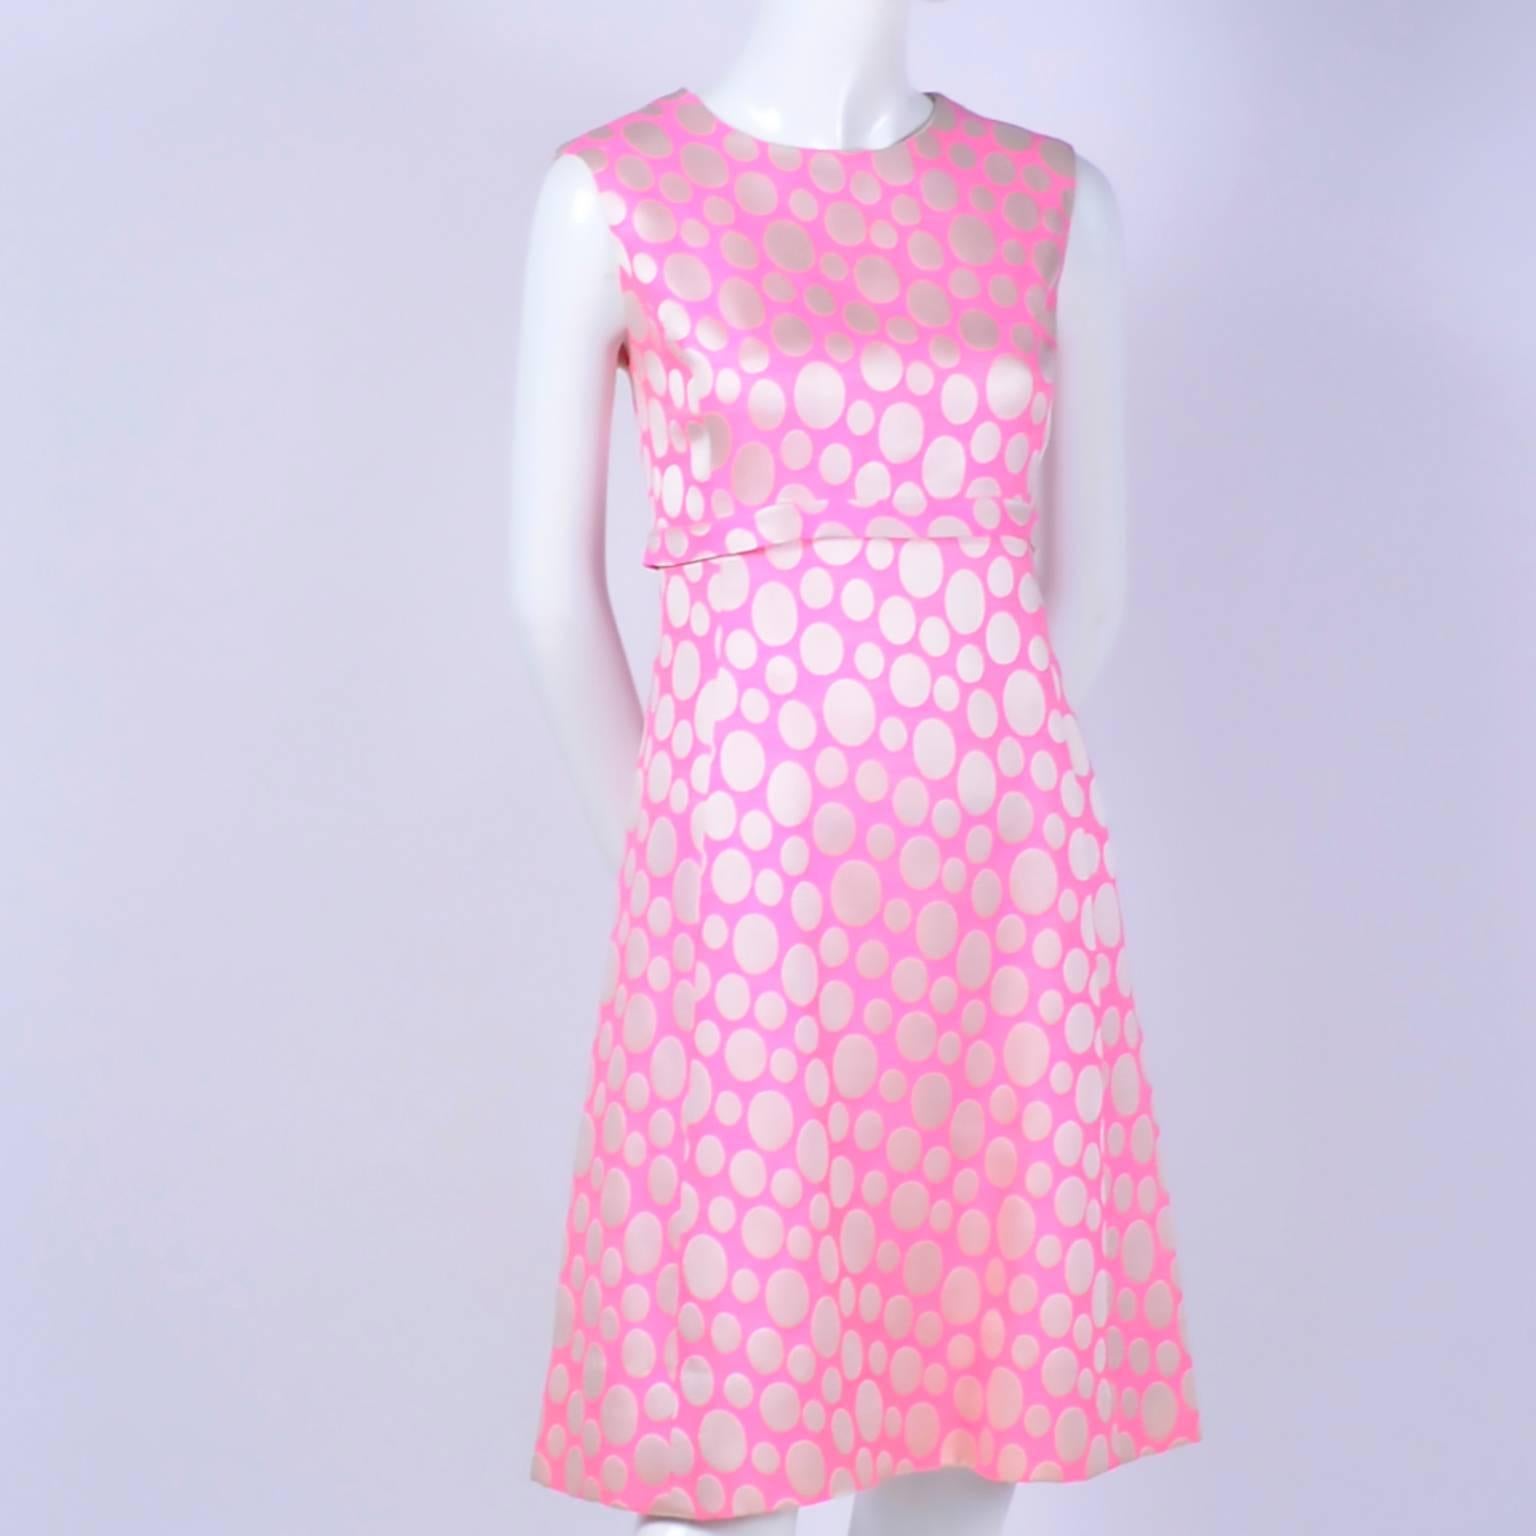 This pink and ivory polka dot ensemble includes a sleeveless, empire waist dress and a matching coat.  The suit was purchased in the 1960's at the Crest Room at Meier and Frank Department store. The Crest room was a specialty department of the store